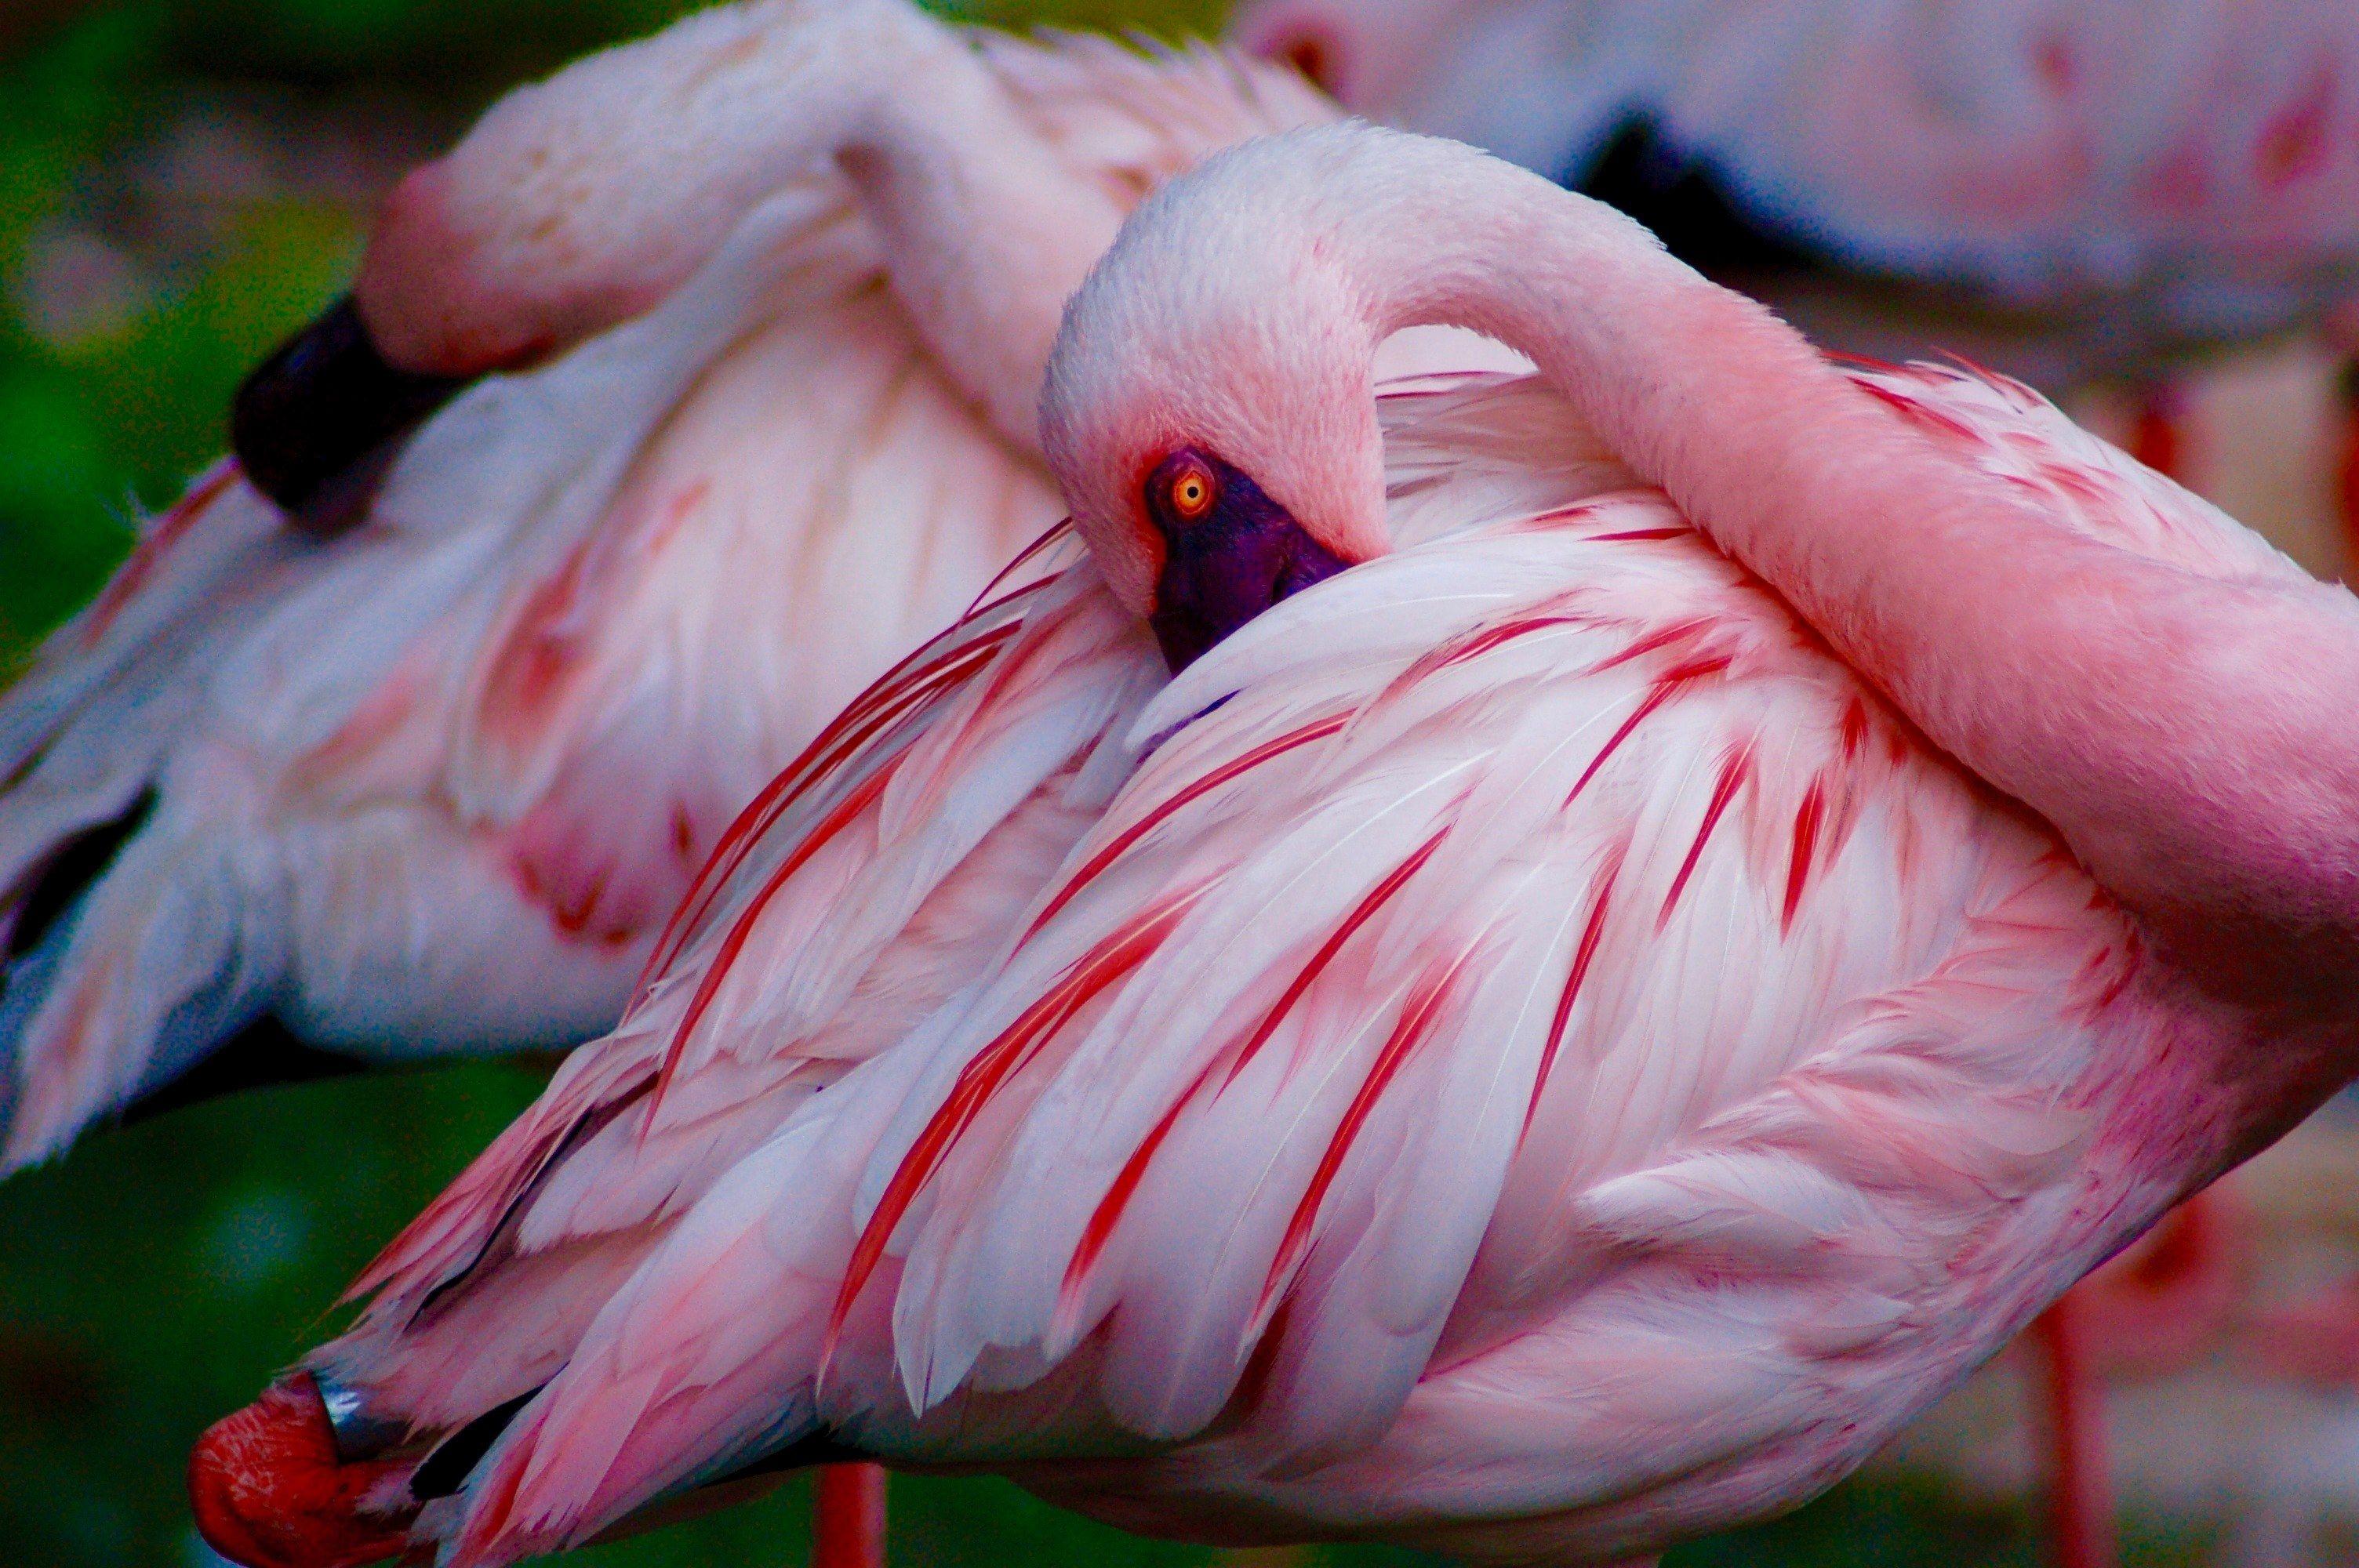 flamingo pink bird and feathers HD wallpaper and background